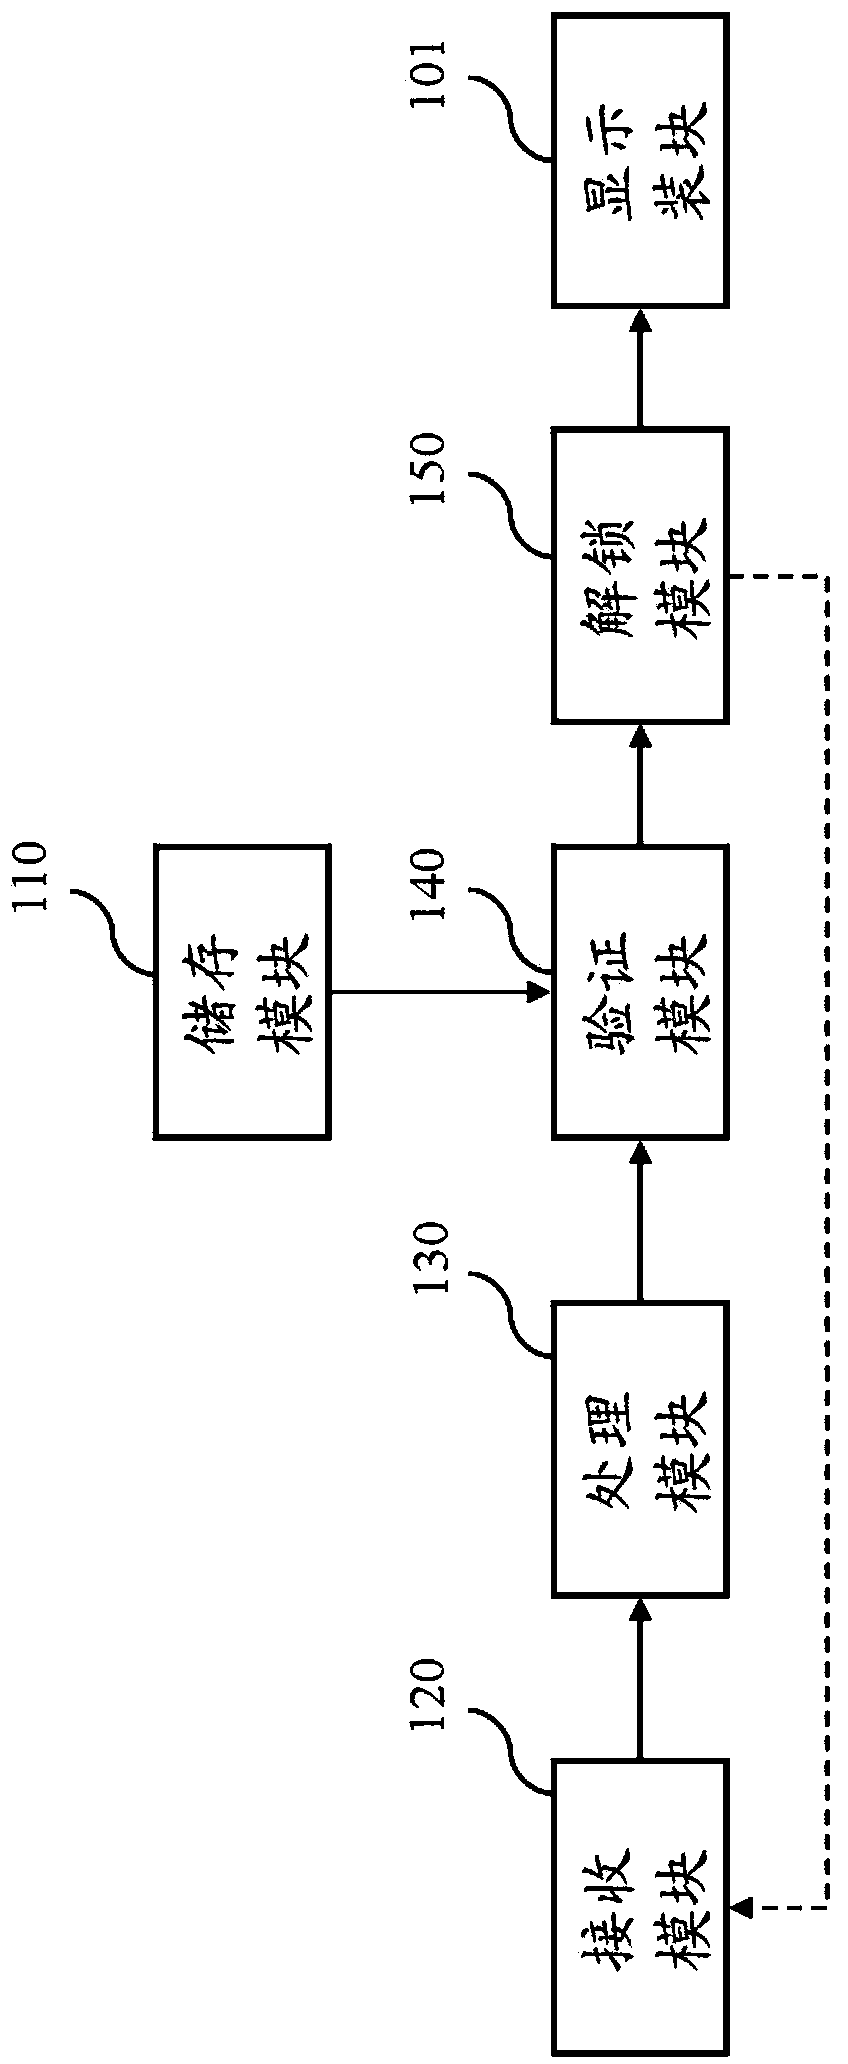 Voice unlocking system and method